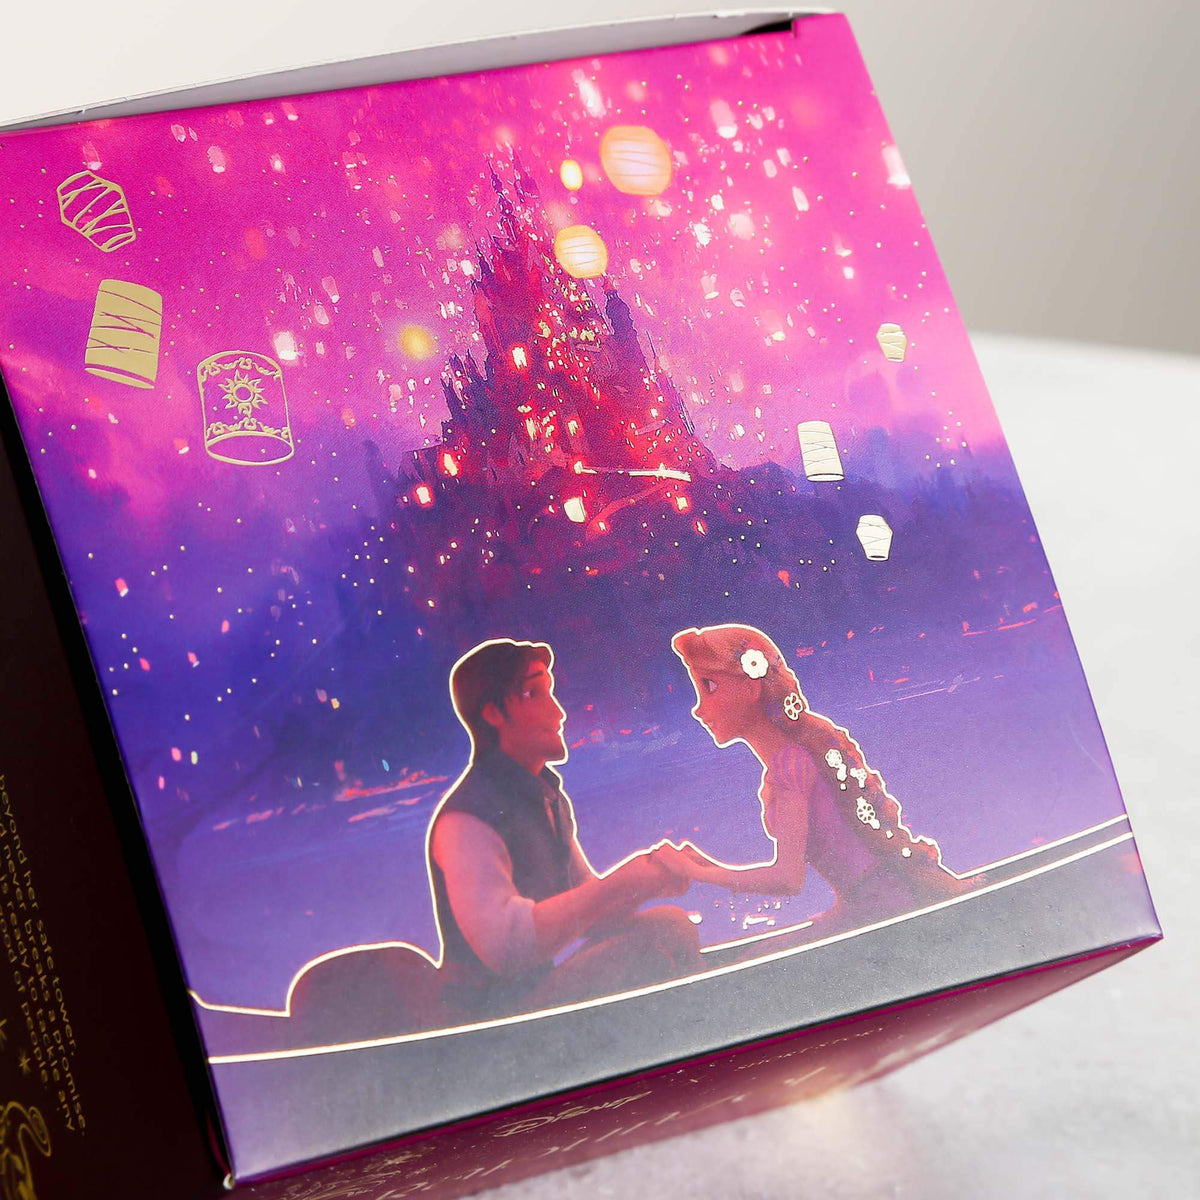 Short Story | Disney Candle Tangled 280g